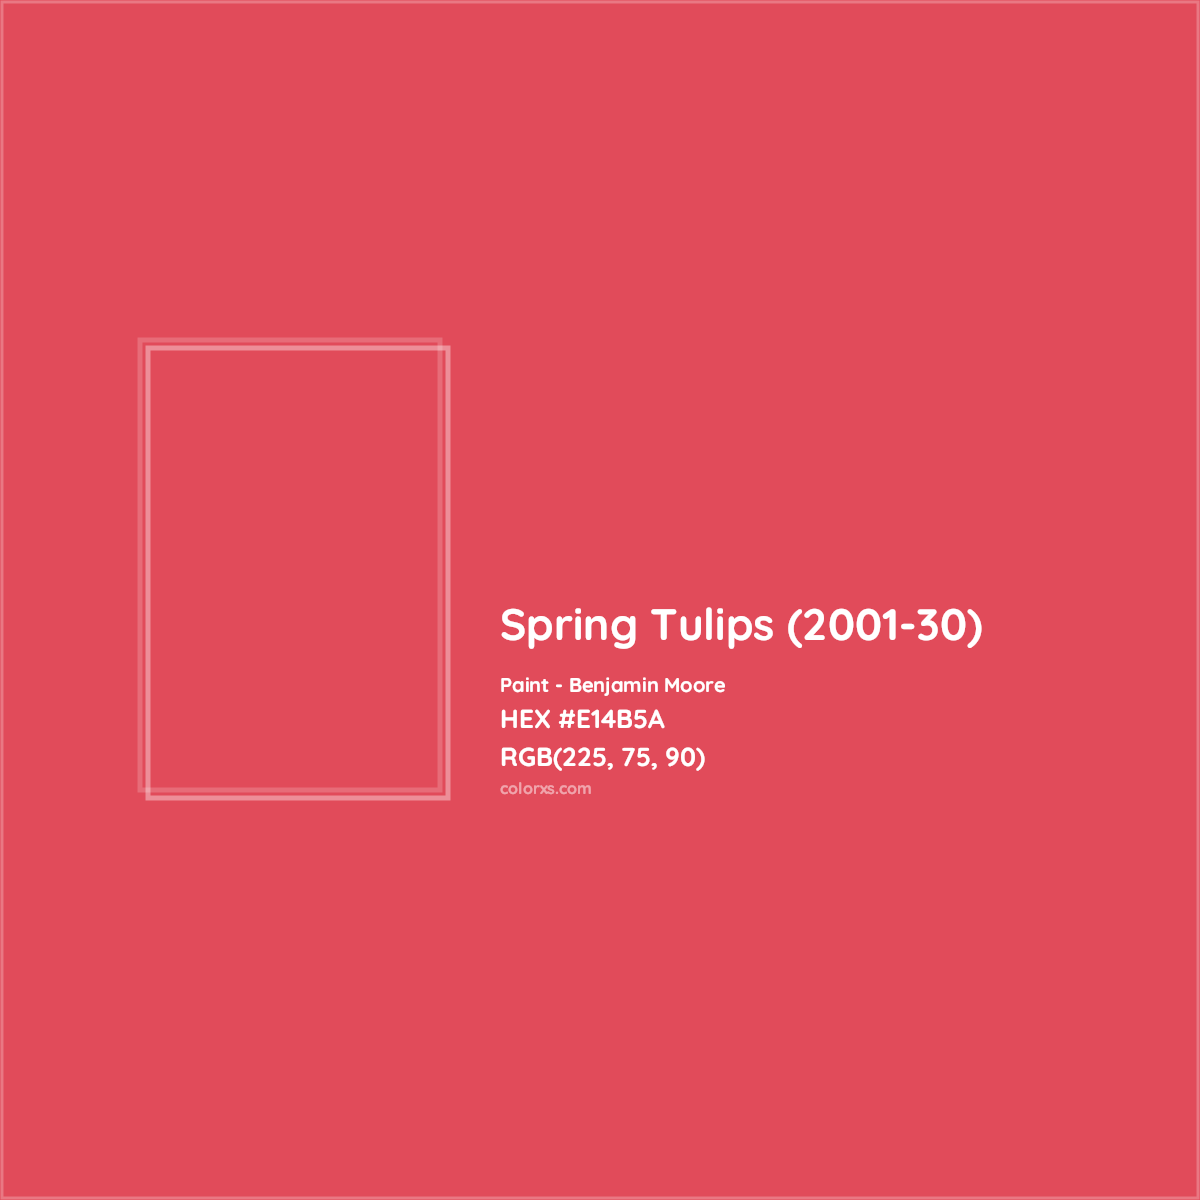 HEX #E14B5A Spring Tulips (2001-30) Paint Benjamin Moore - Color Code